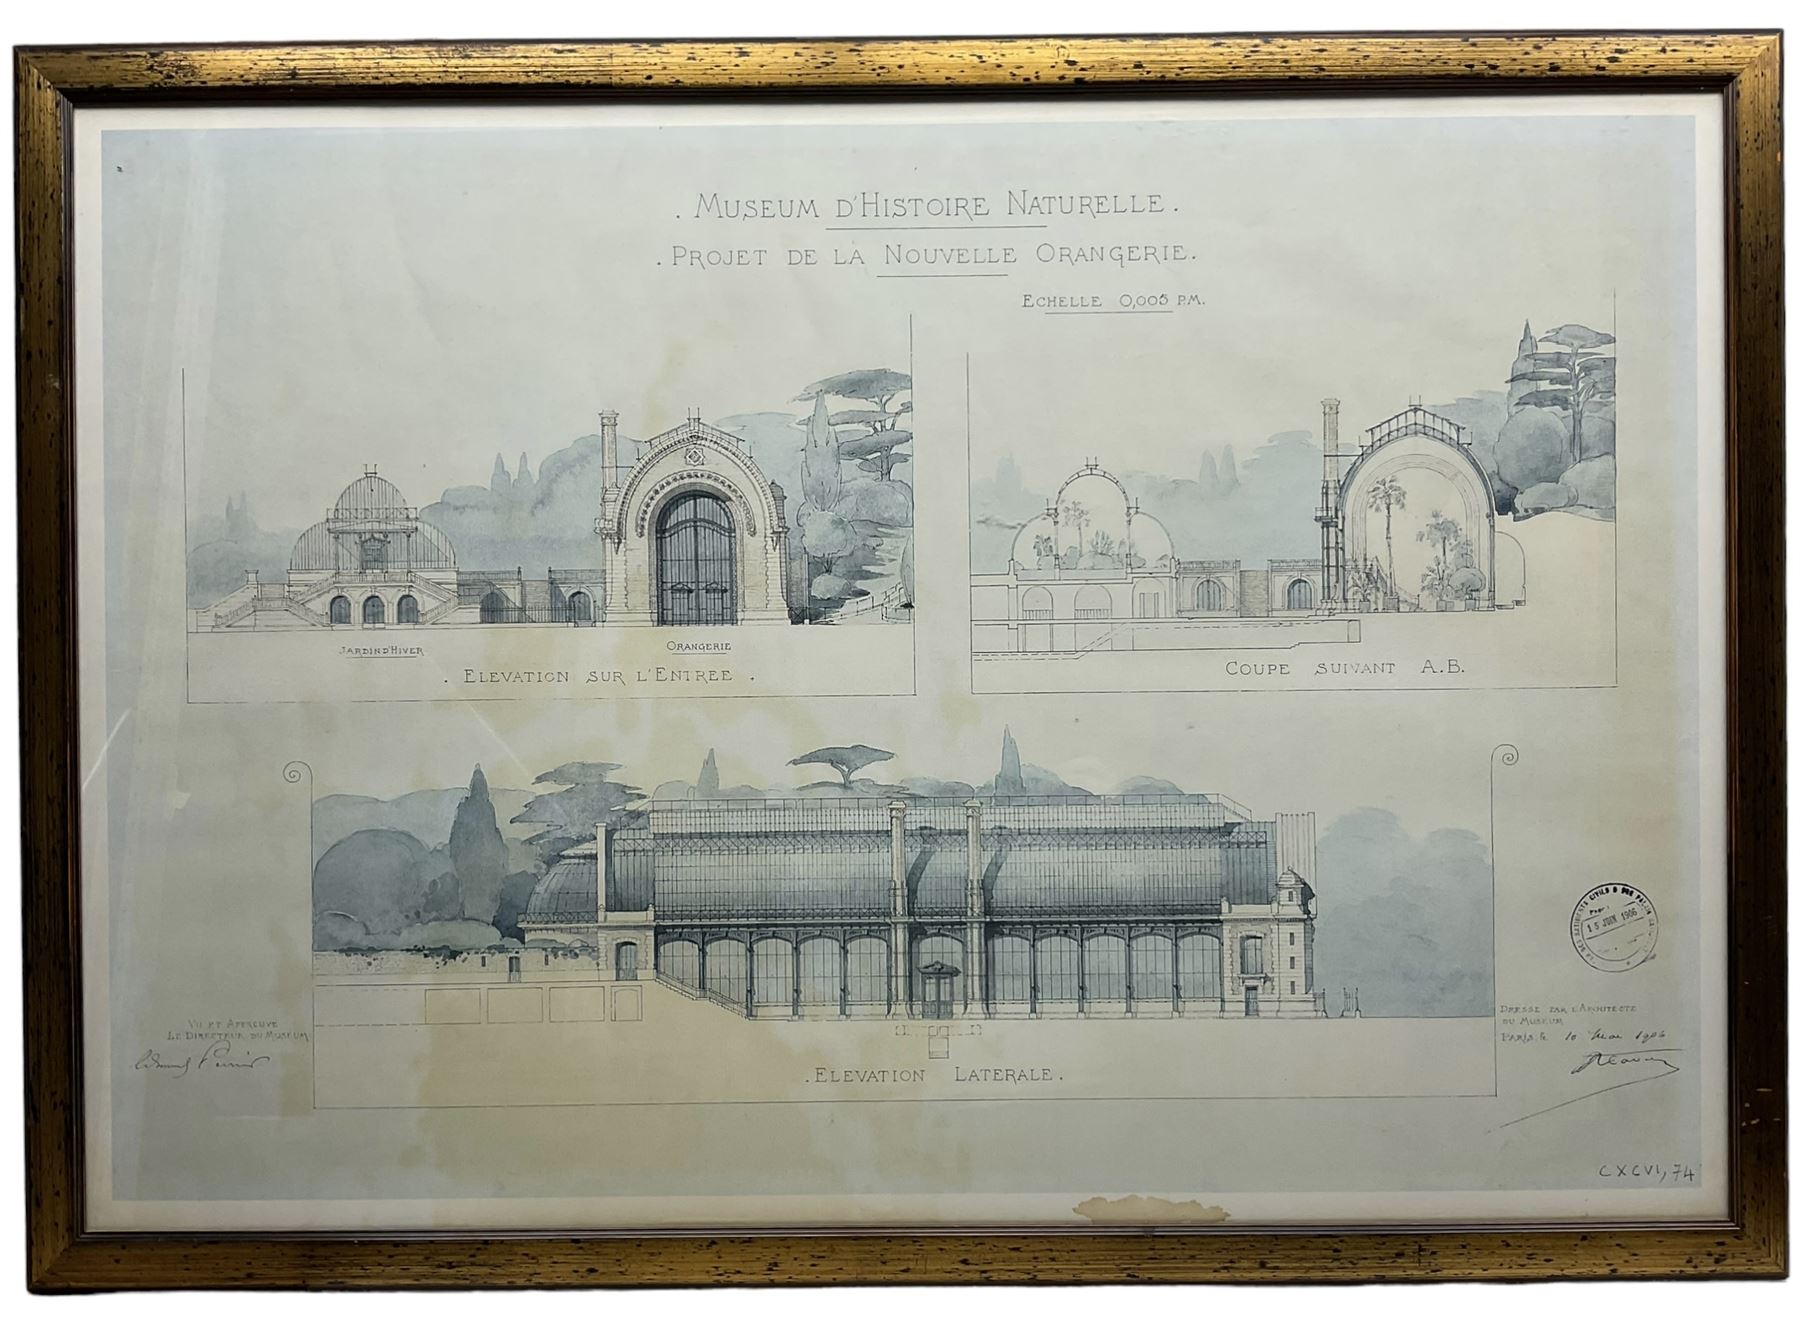 After the Architectural School of Paris (c1906): Designs for the National Museum of Natural History - Image 7 of 8